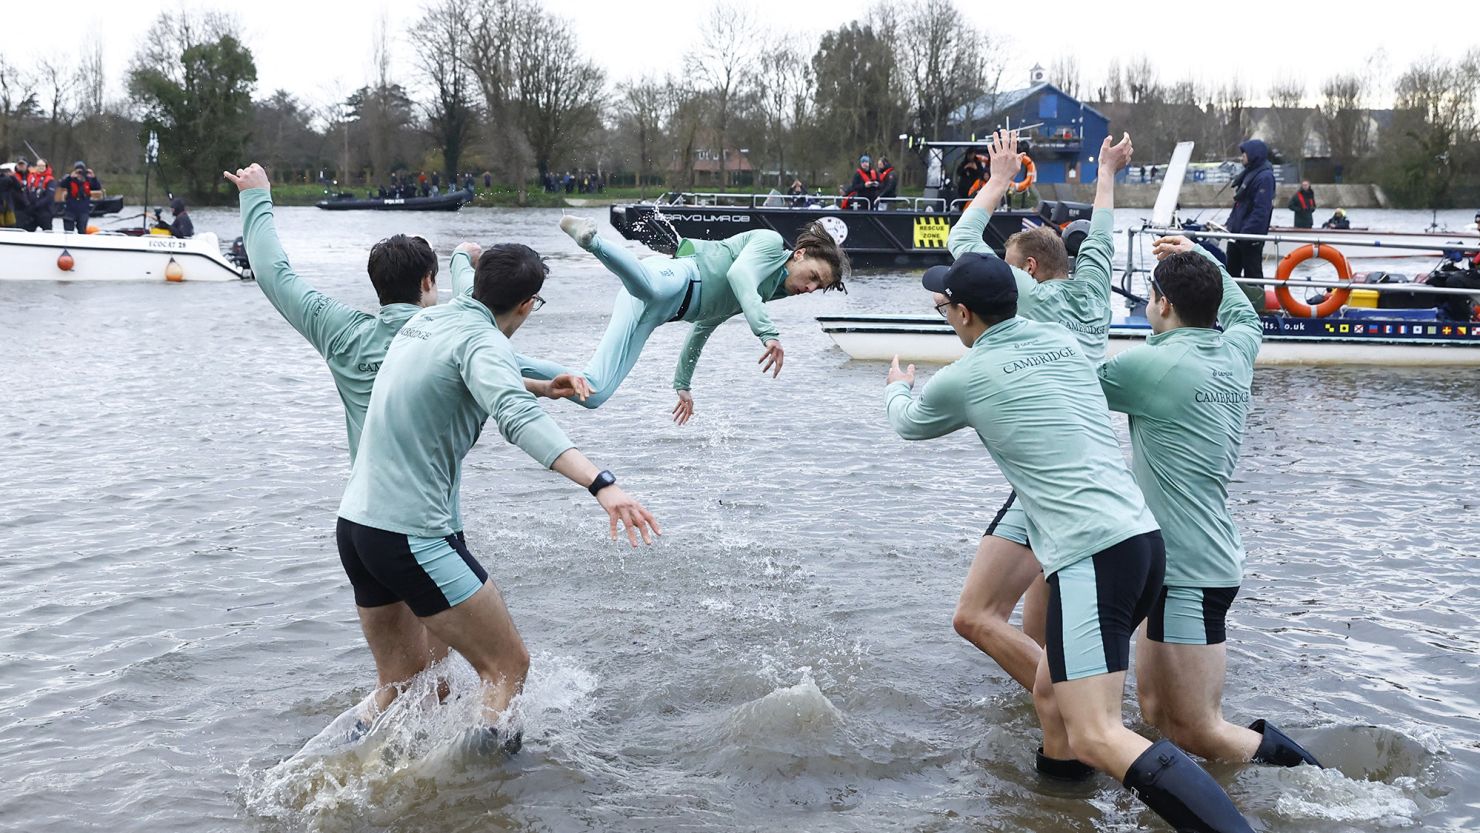 Cambridge coxswain Jasper Parish is thrown in the River Thames by teammates after winning the men's race last year.